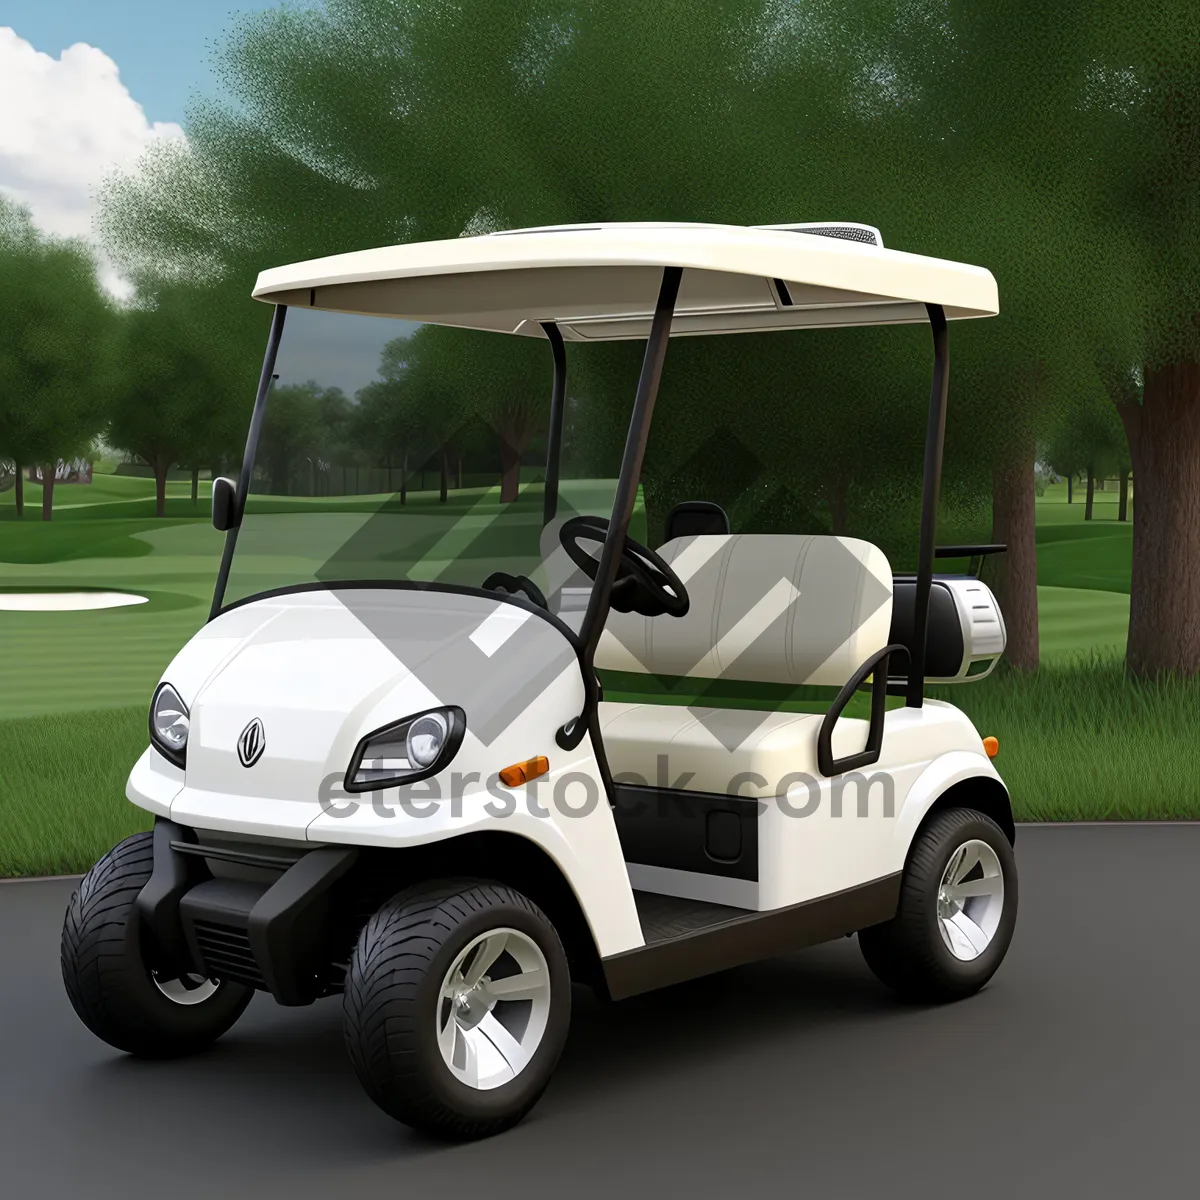 Picture of Golf Cart on the Green: Perfect for A Day on the Course